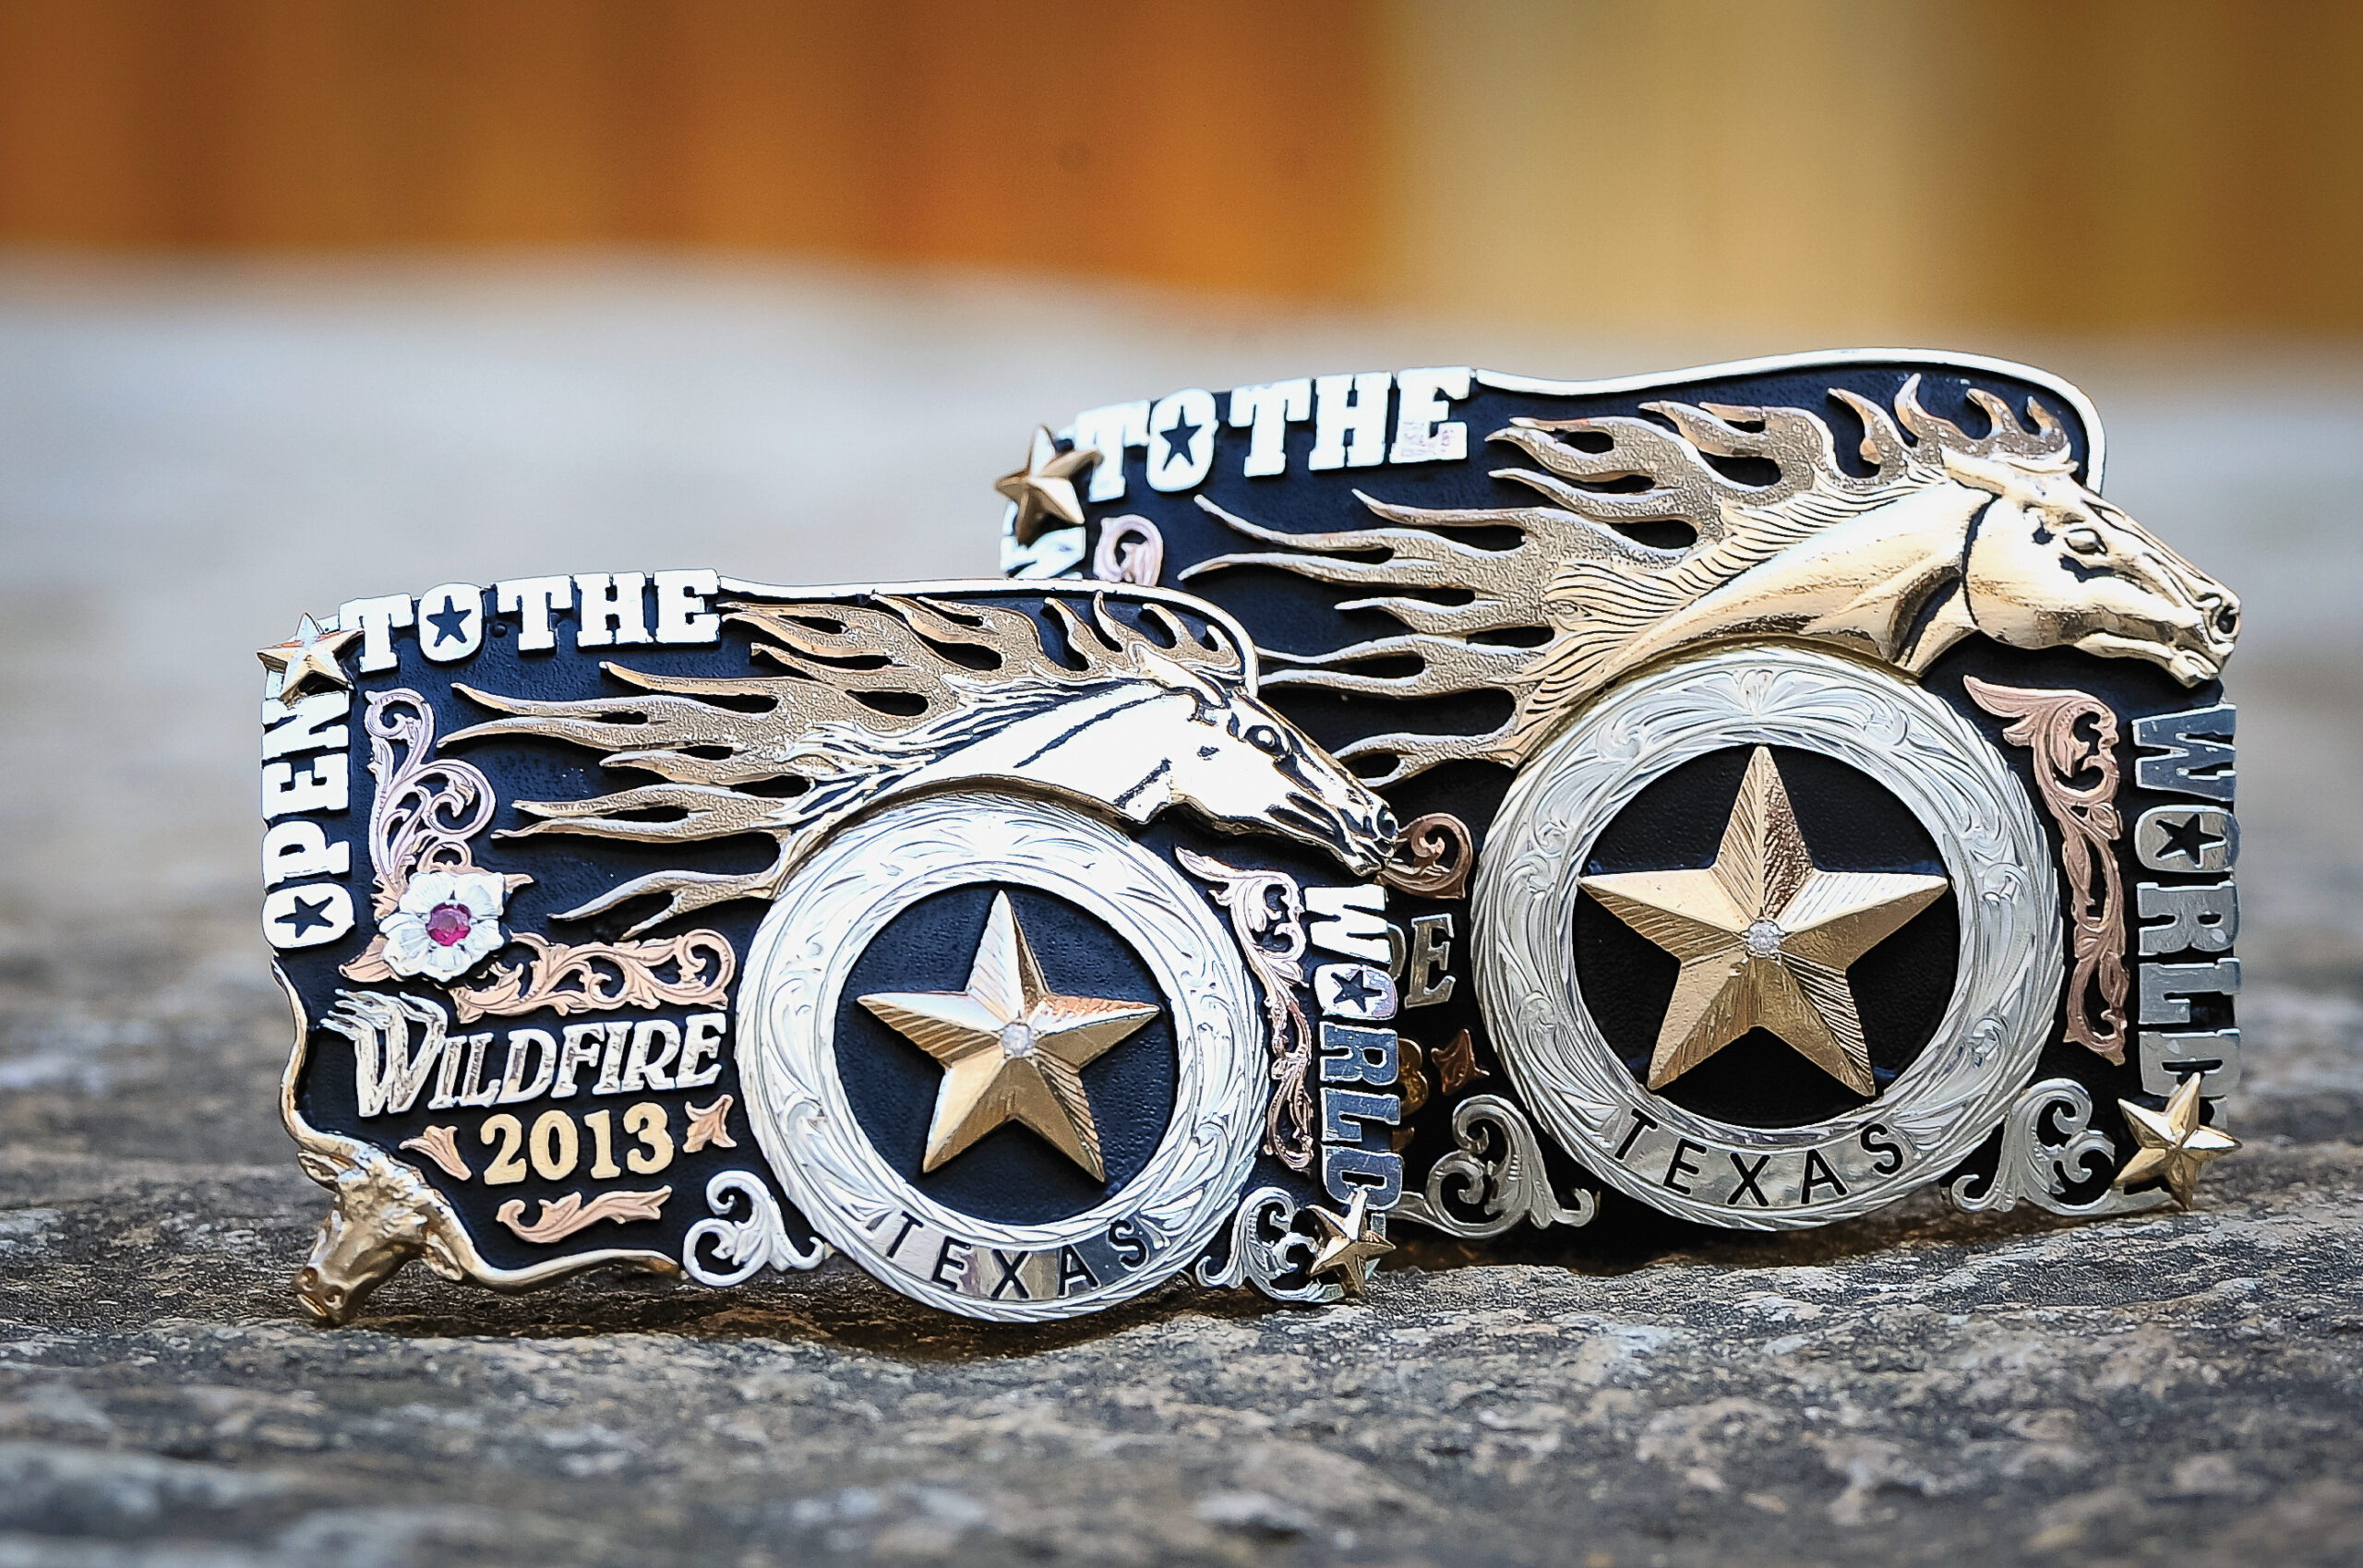 Closeup of the 2013 Open to the Wildfire trophy buckle.